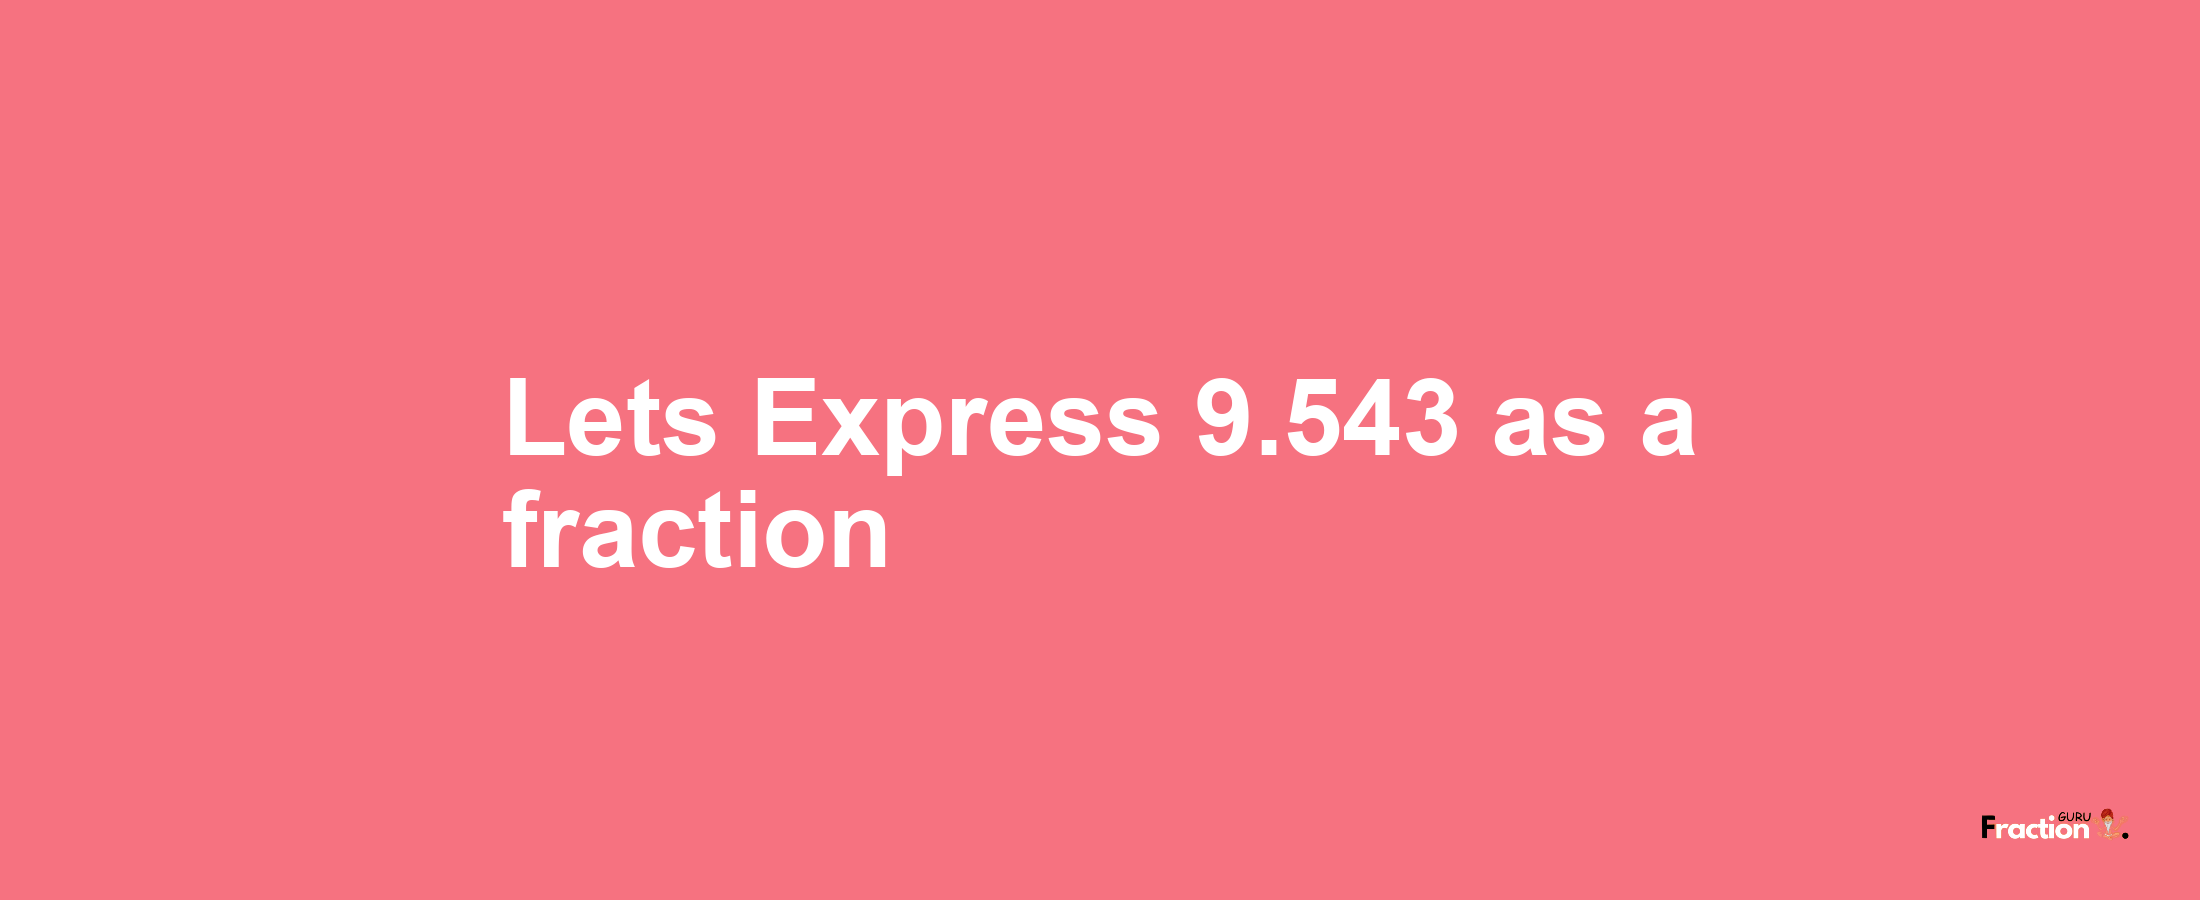 Lets Express 9.543 as afraction